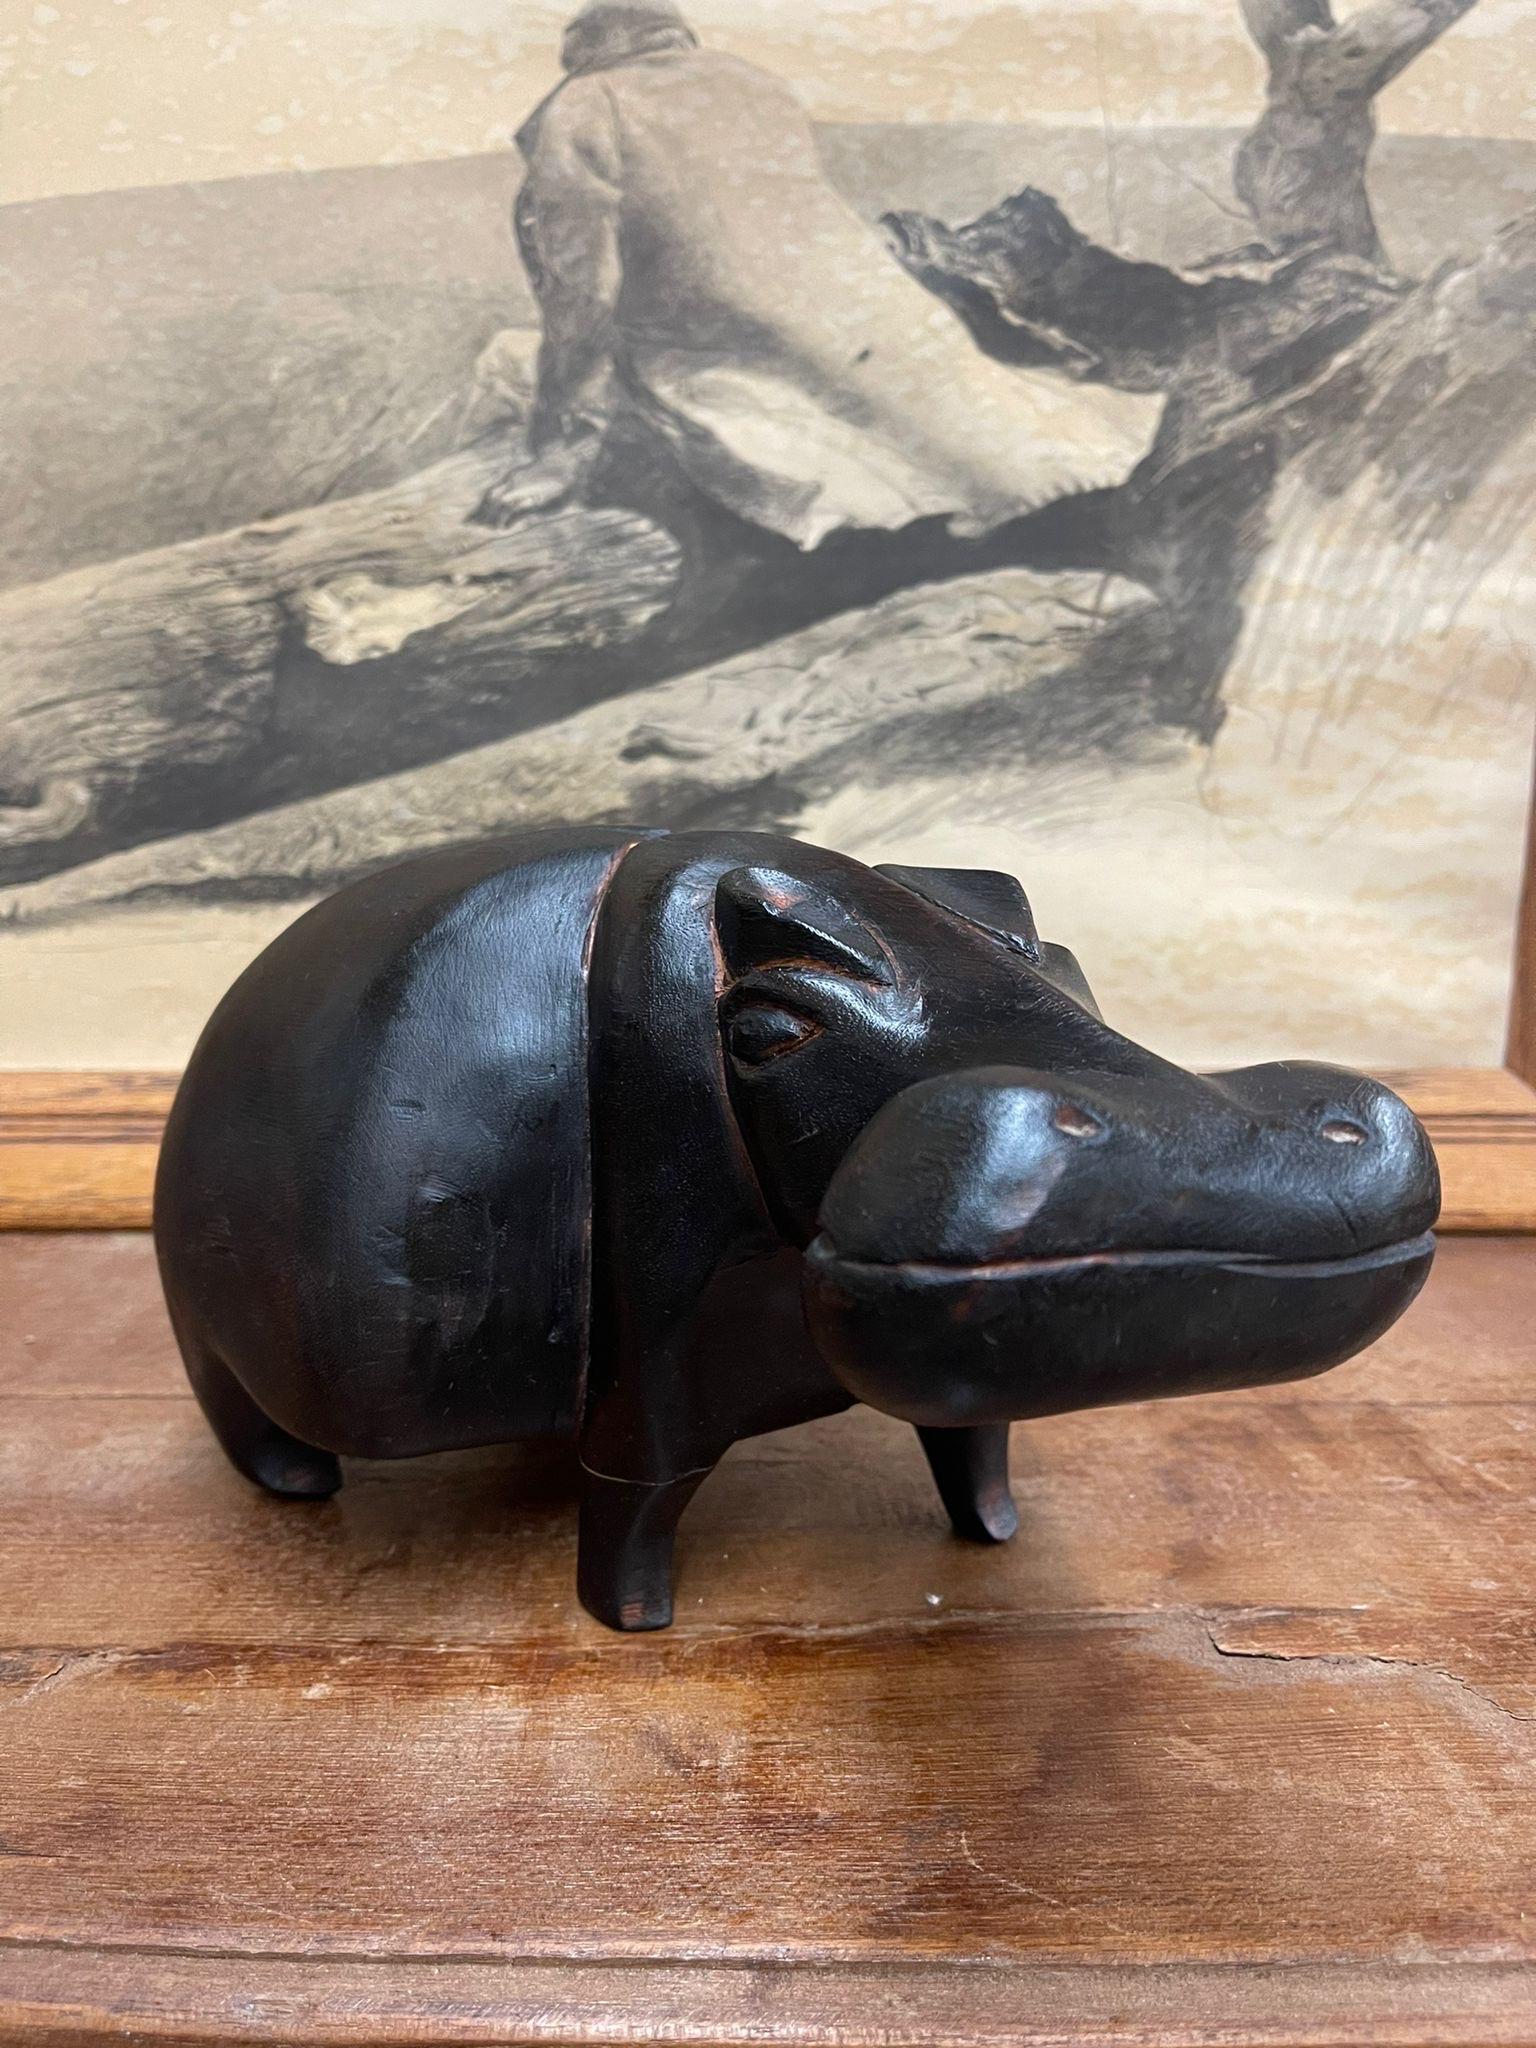 Vintage Handmade Wooden Hippo. Due to Age , there is Cracking on the Bottom as Shown. Possibly African Origin. Vintage Condition Consistent with Age as Pictured.

Dimensions. 7 W ; 4 D ; 5 H